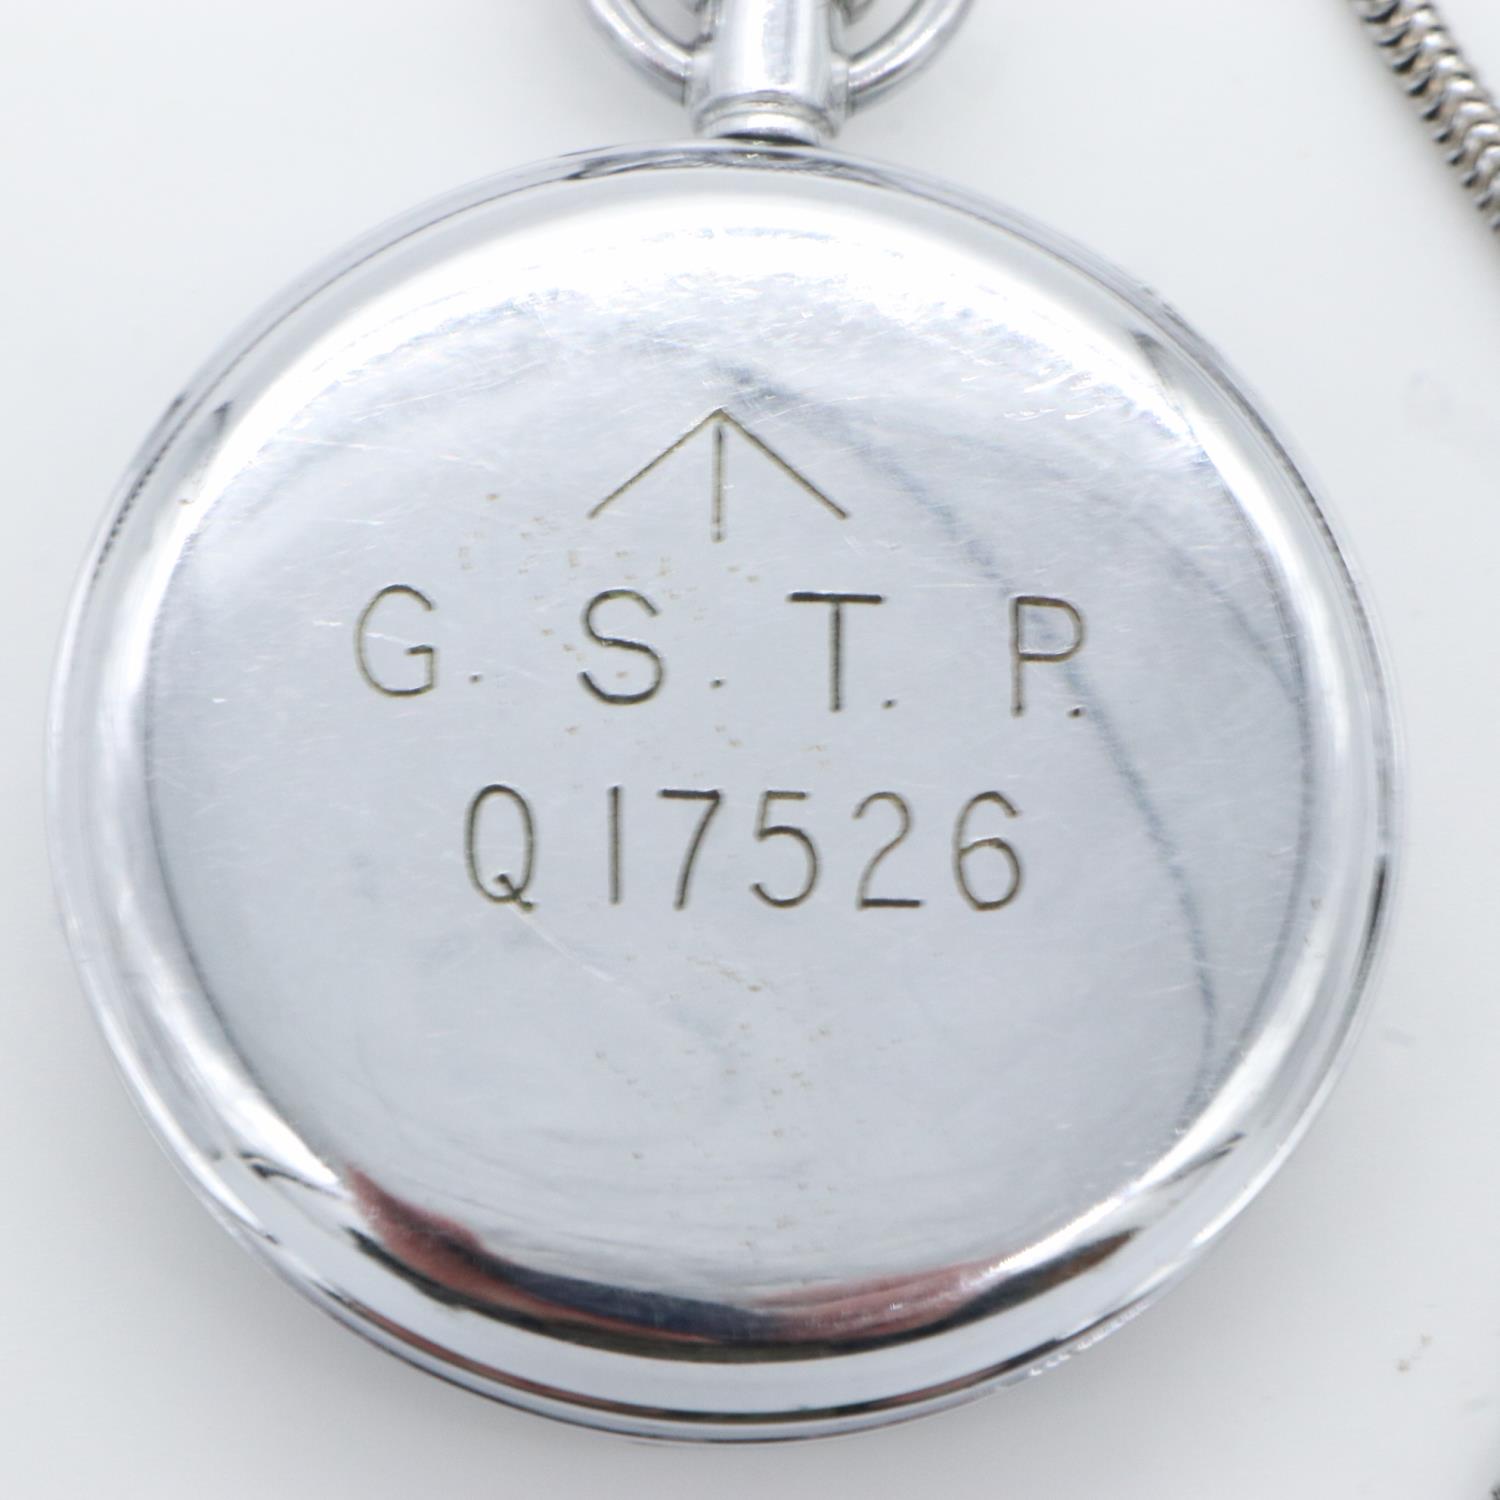 British WWII military issue chromium cased crown wind pocket watch, numbered verso Q17526, with - Image 2 of 2